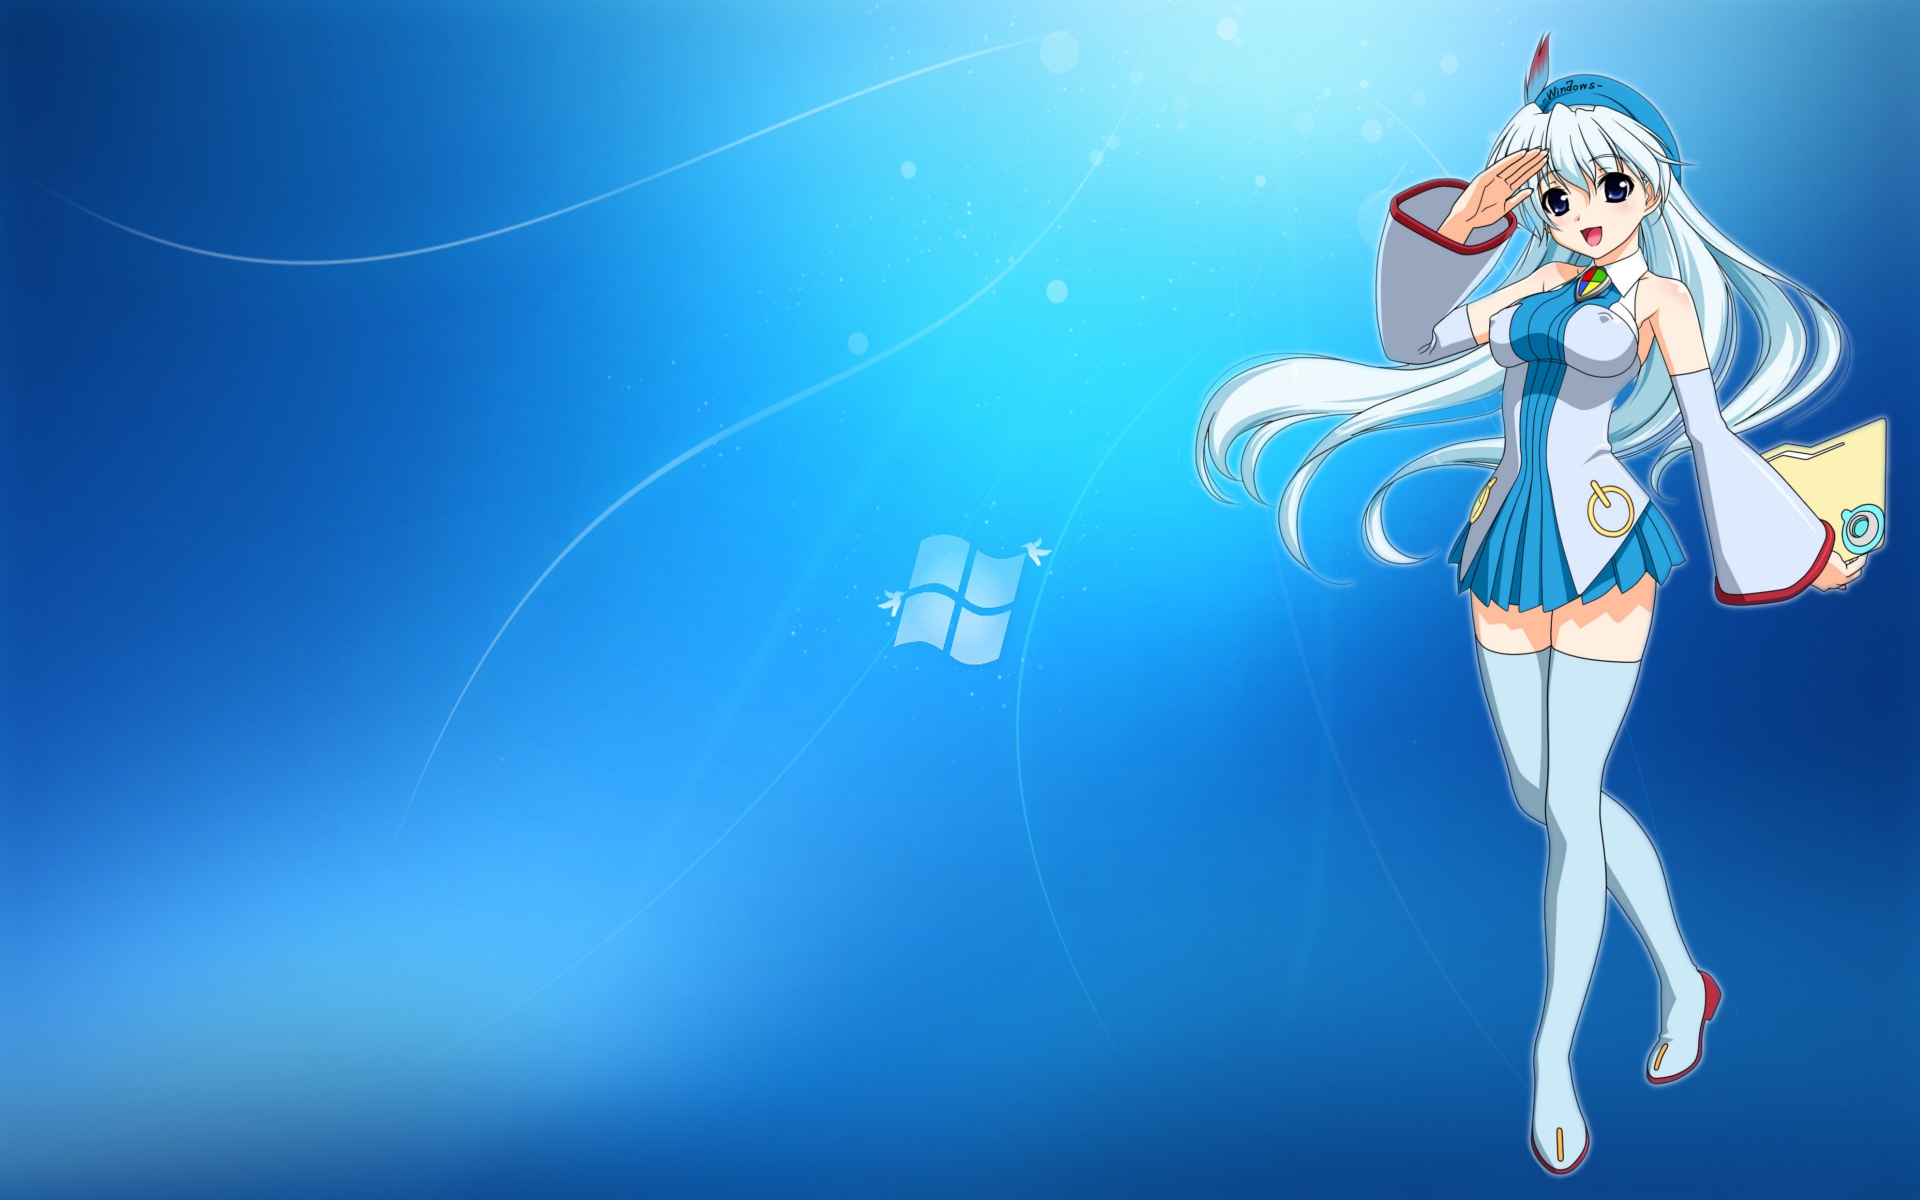 Free Download Hd Windows 10 Anime Wallpaper 1920x1200 For Your